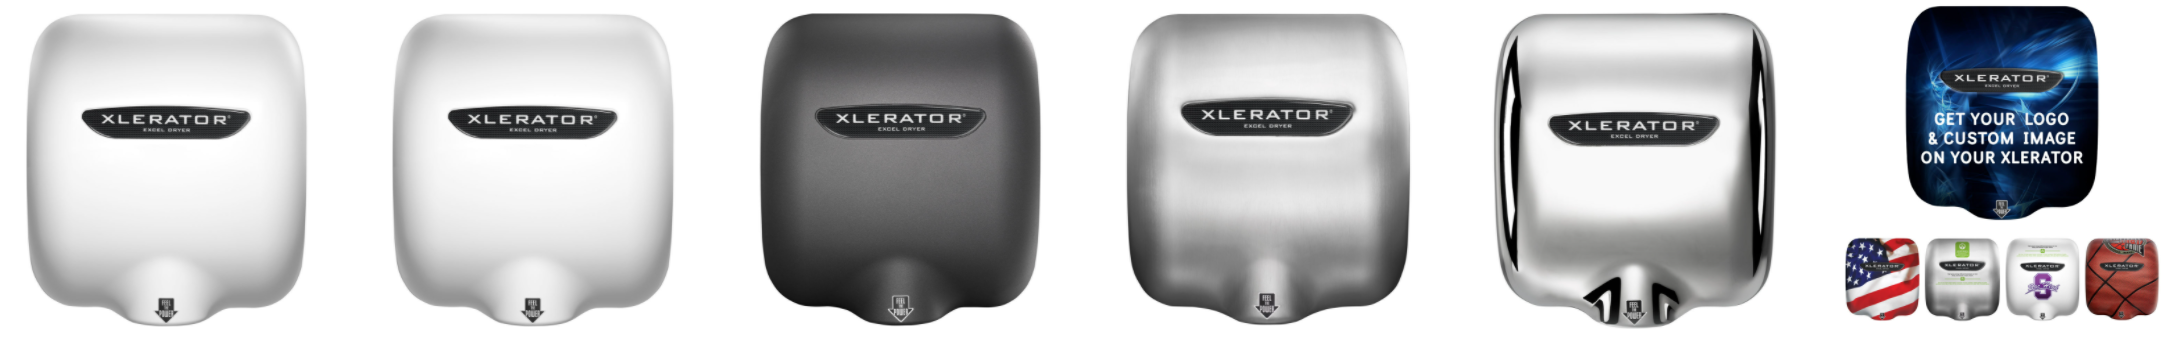 XLERATOR-Color-Comparisons-on-Hand-Dryer-Covers